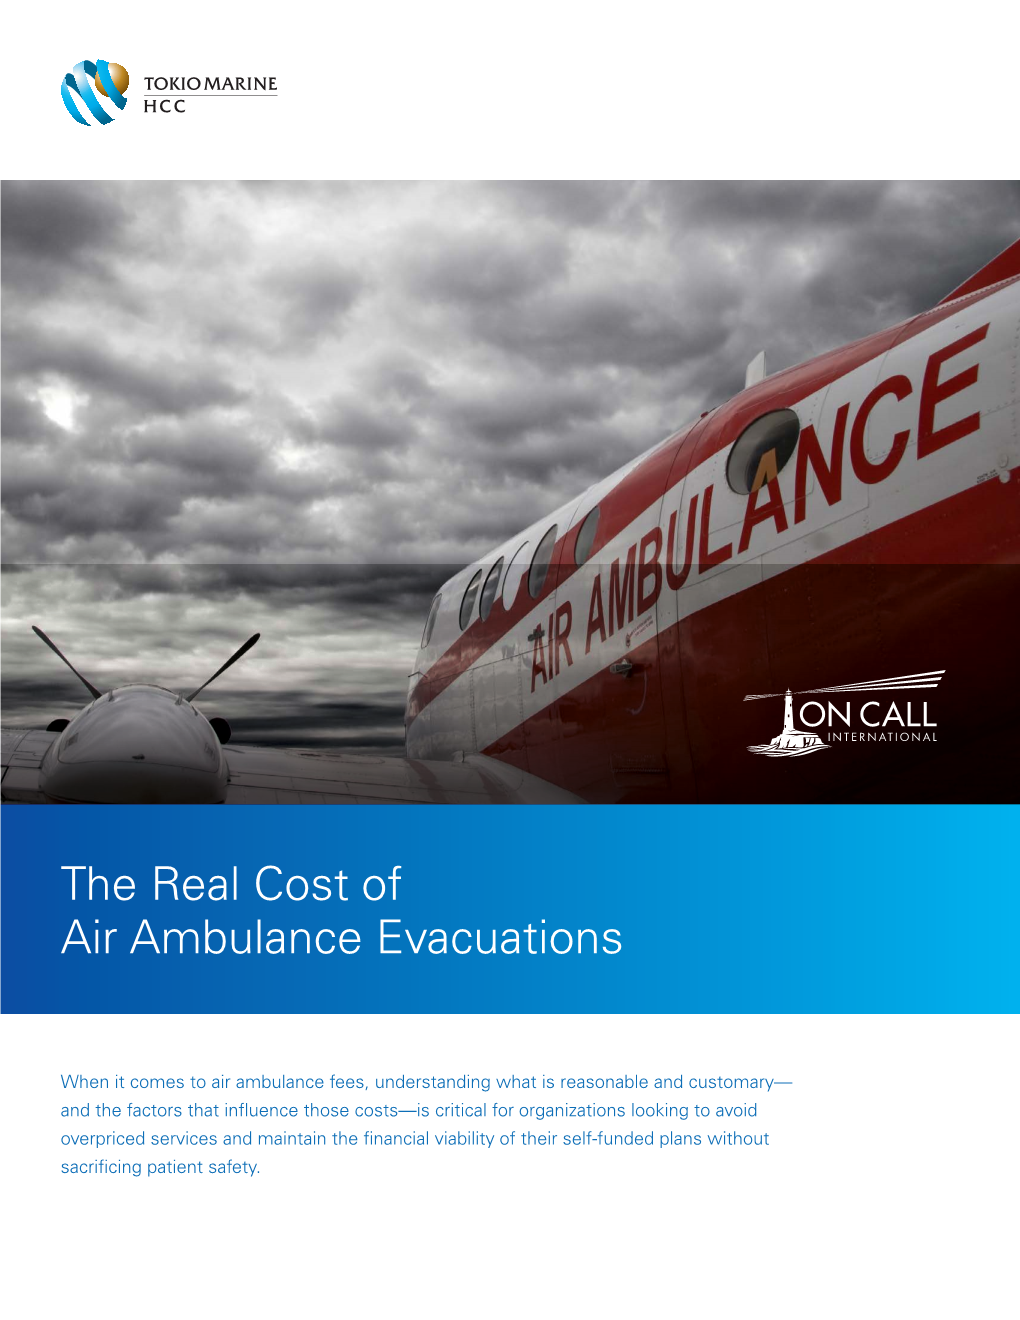 The Real Cost of Air Ambulance Evacuations